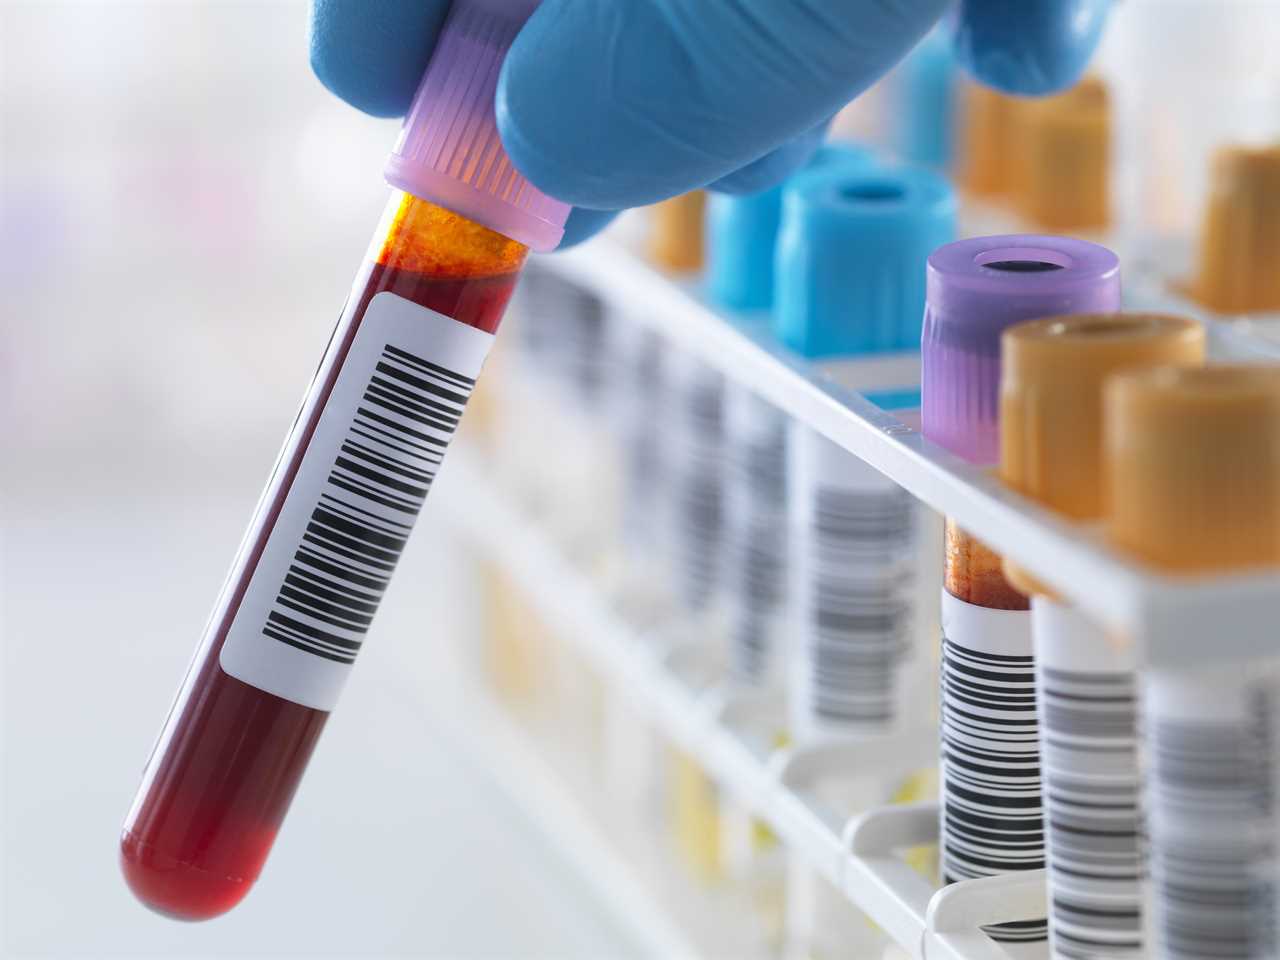 Breakthrough for prostate cancer as new simple blood test is 94% accurate